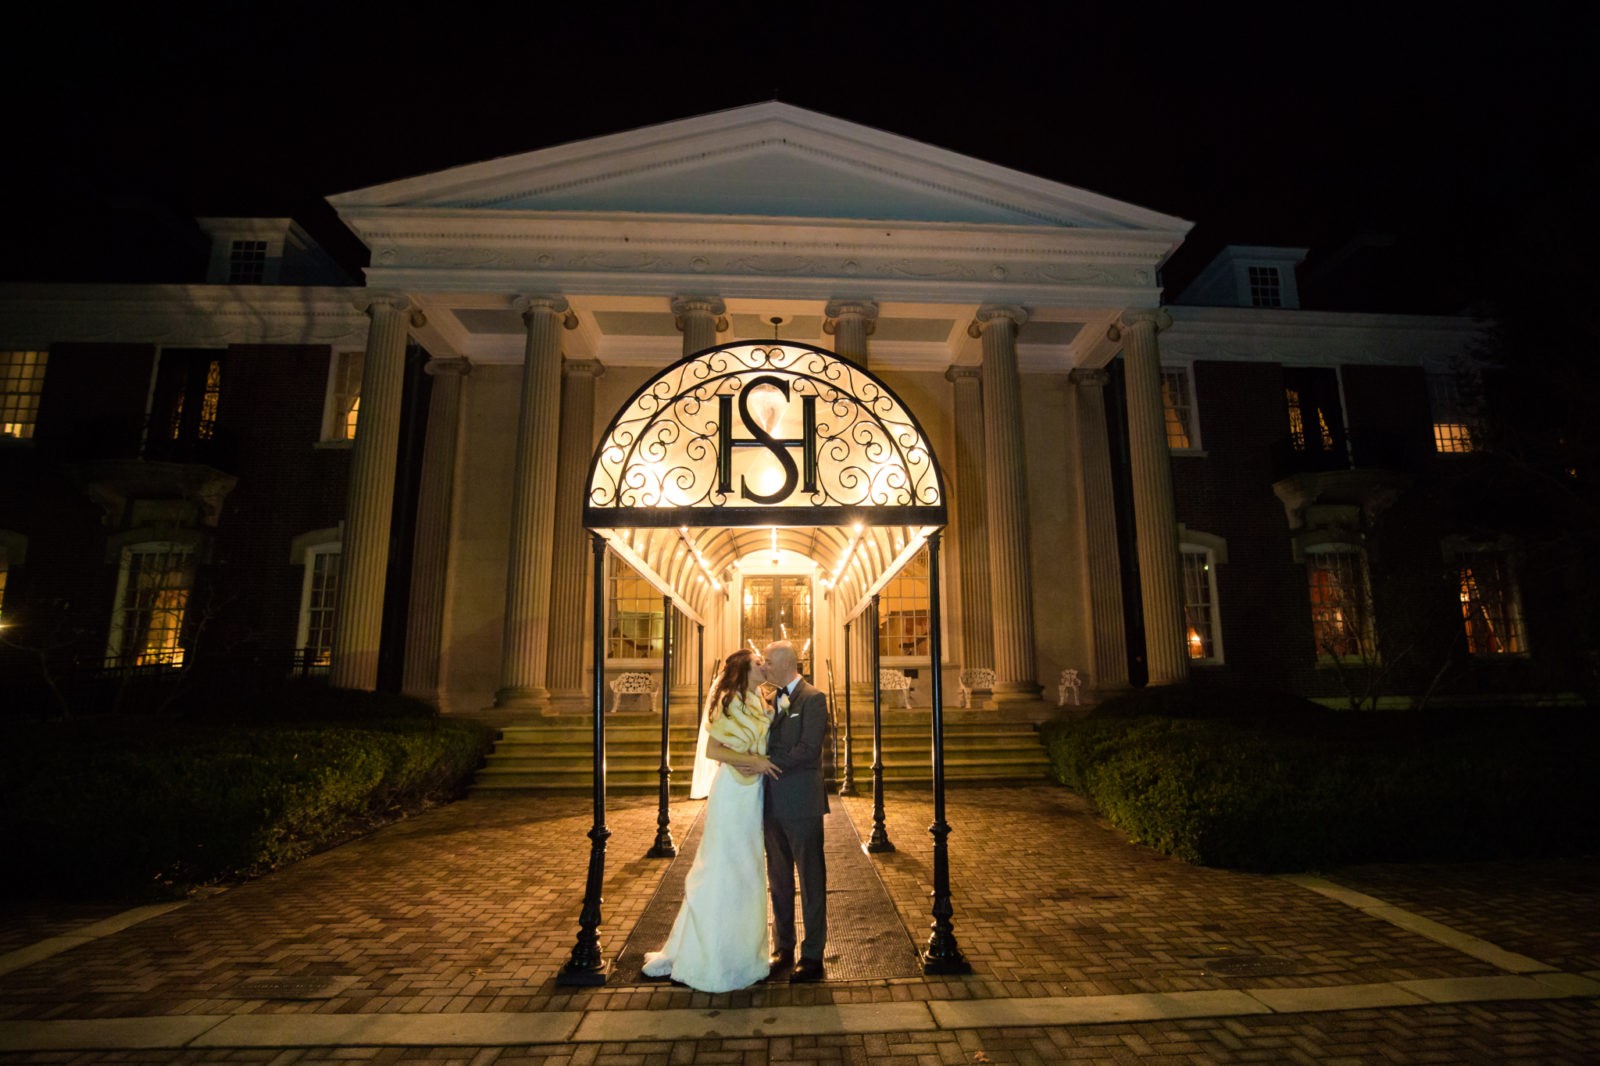 Winter wedding at the Club at UK's Spindletop Hall in Lexington, Kentucky. Photo by Kevin and Anna Photography